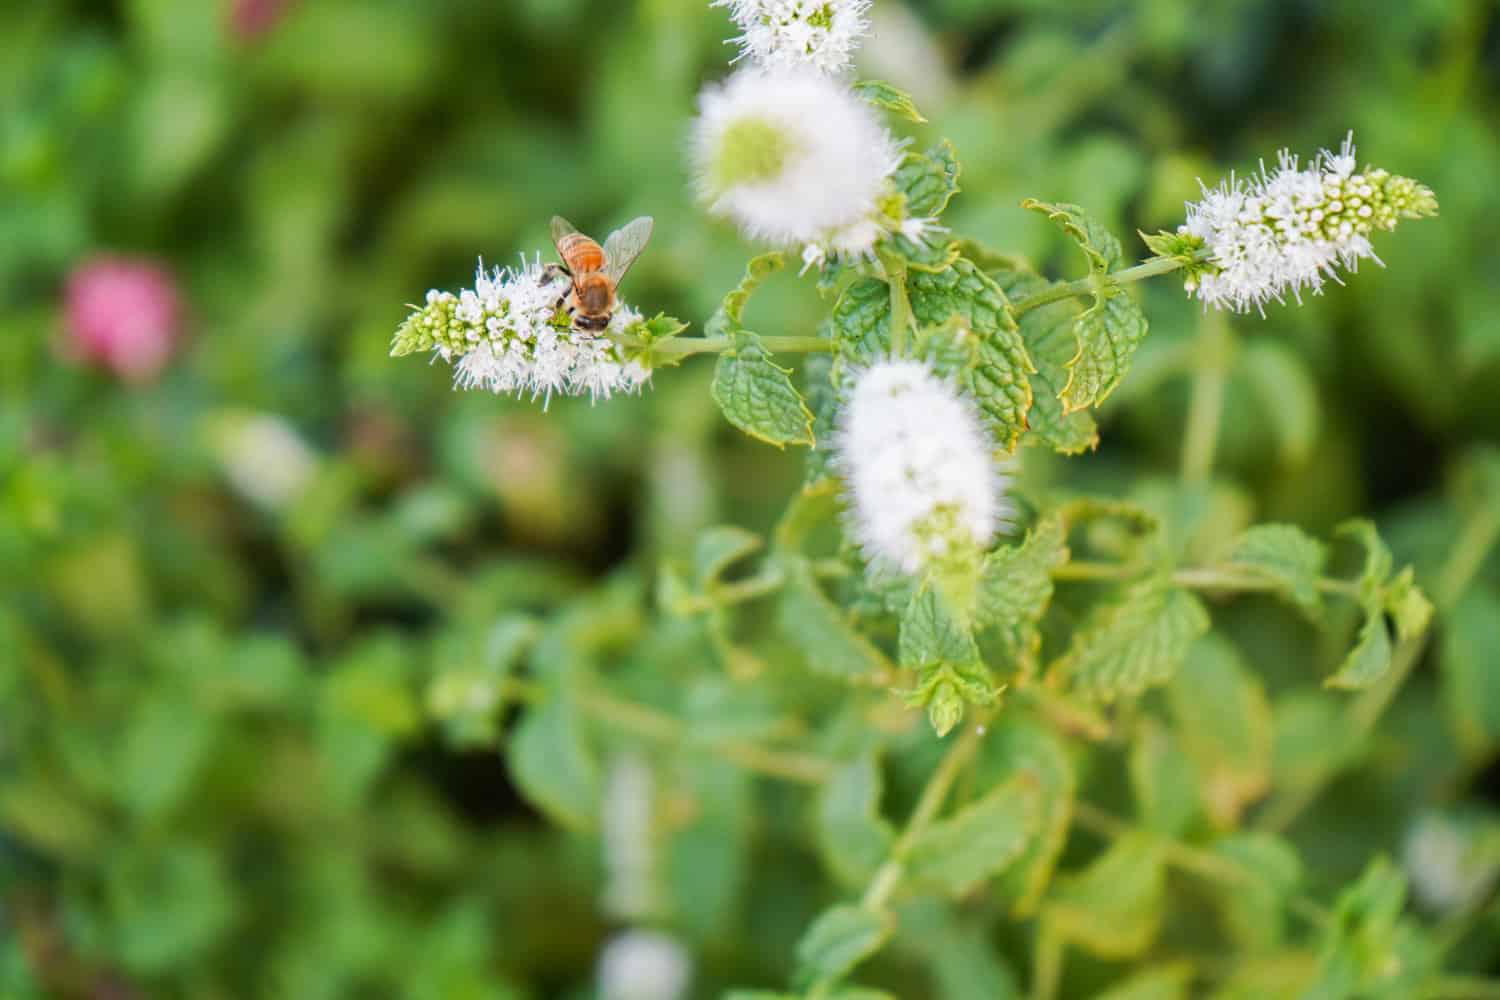 A hoverfly on a mint flower